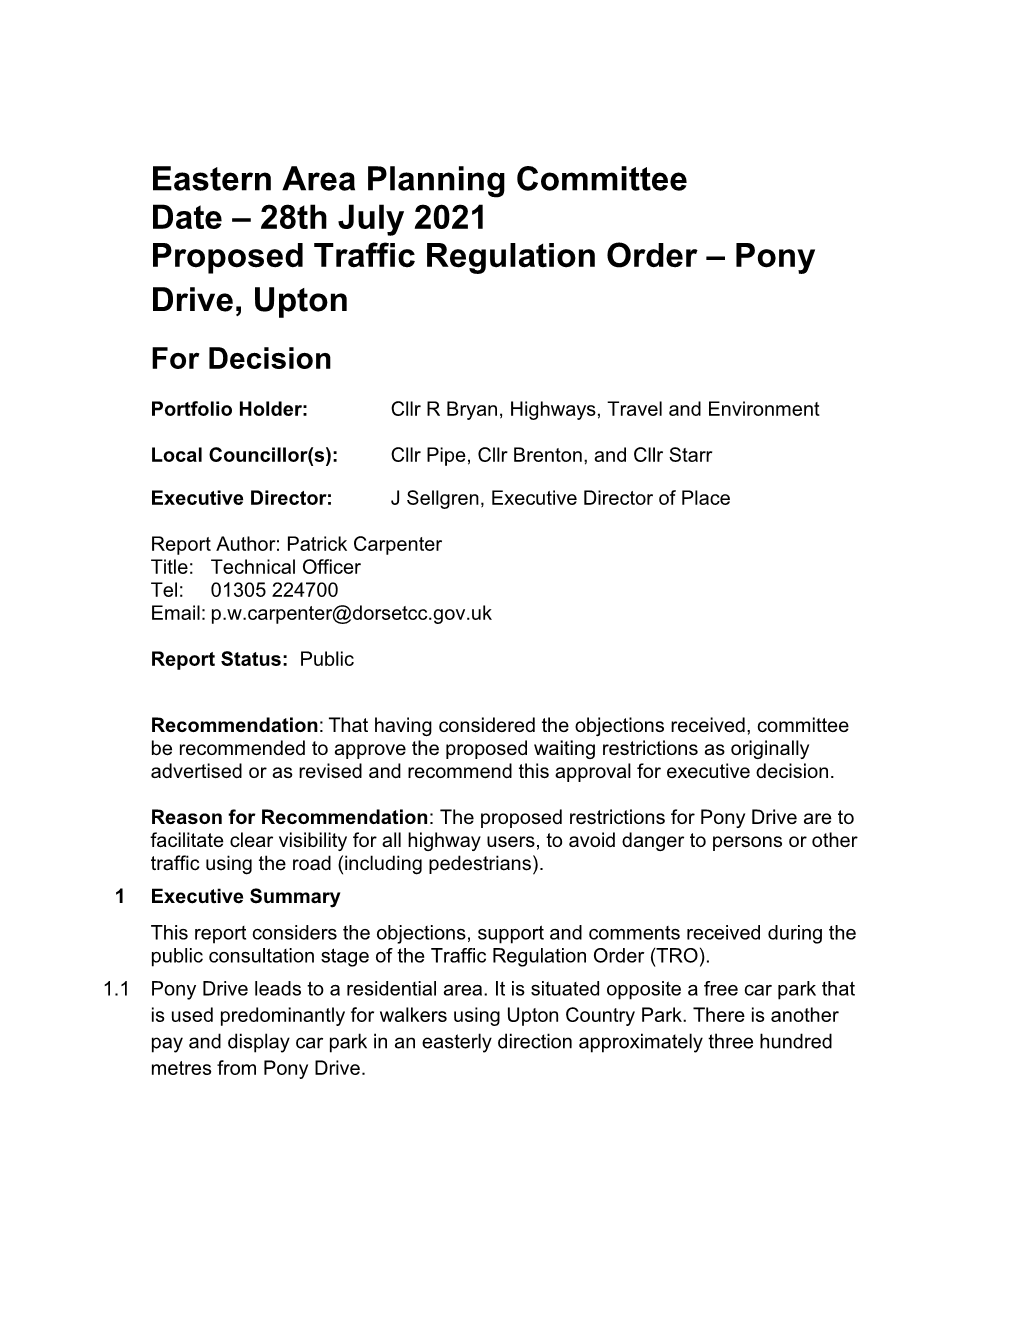 Eastern Area Planning Committee Date – 28Th July 2021 Proposed Traffic Regulation Order – Pony Drive, Upton